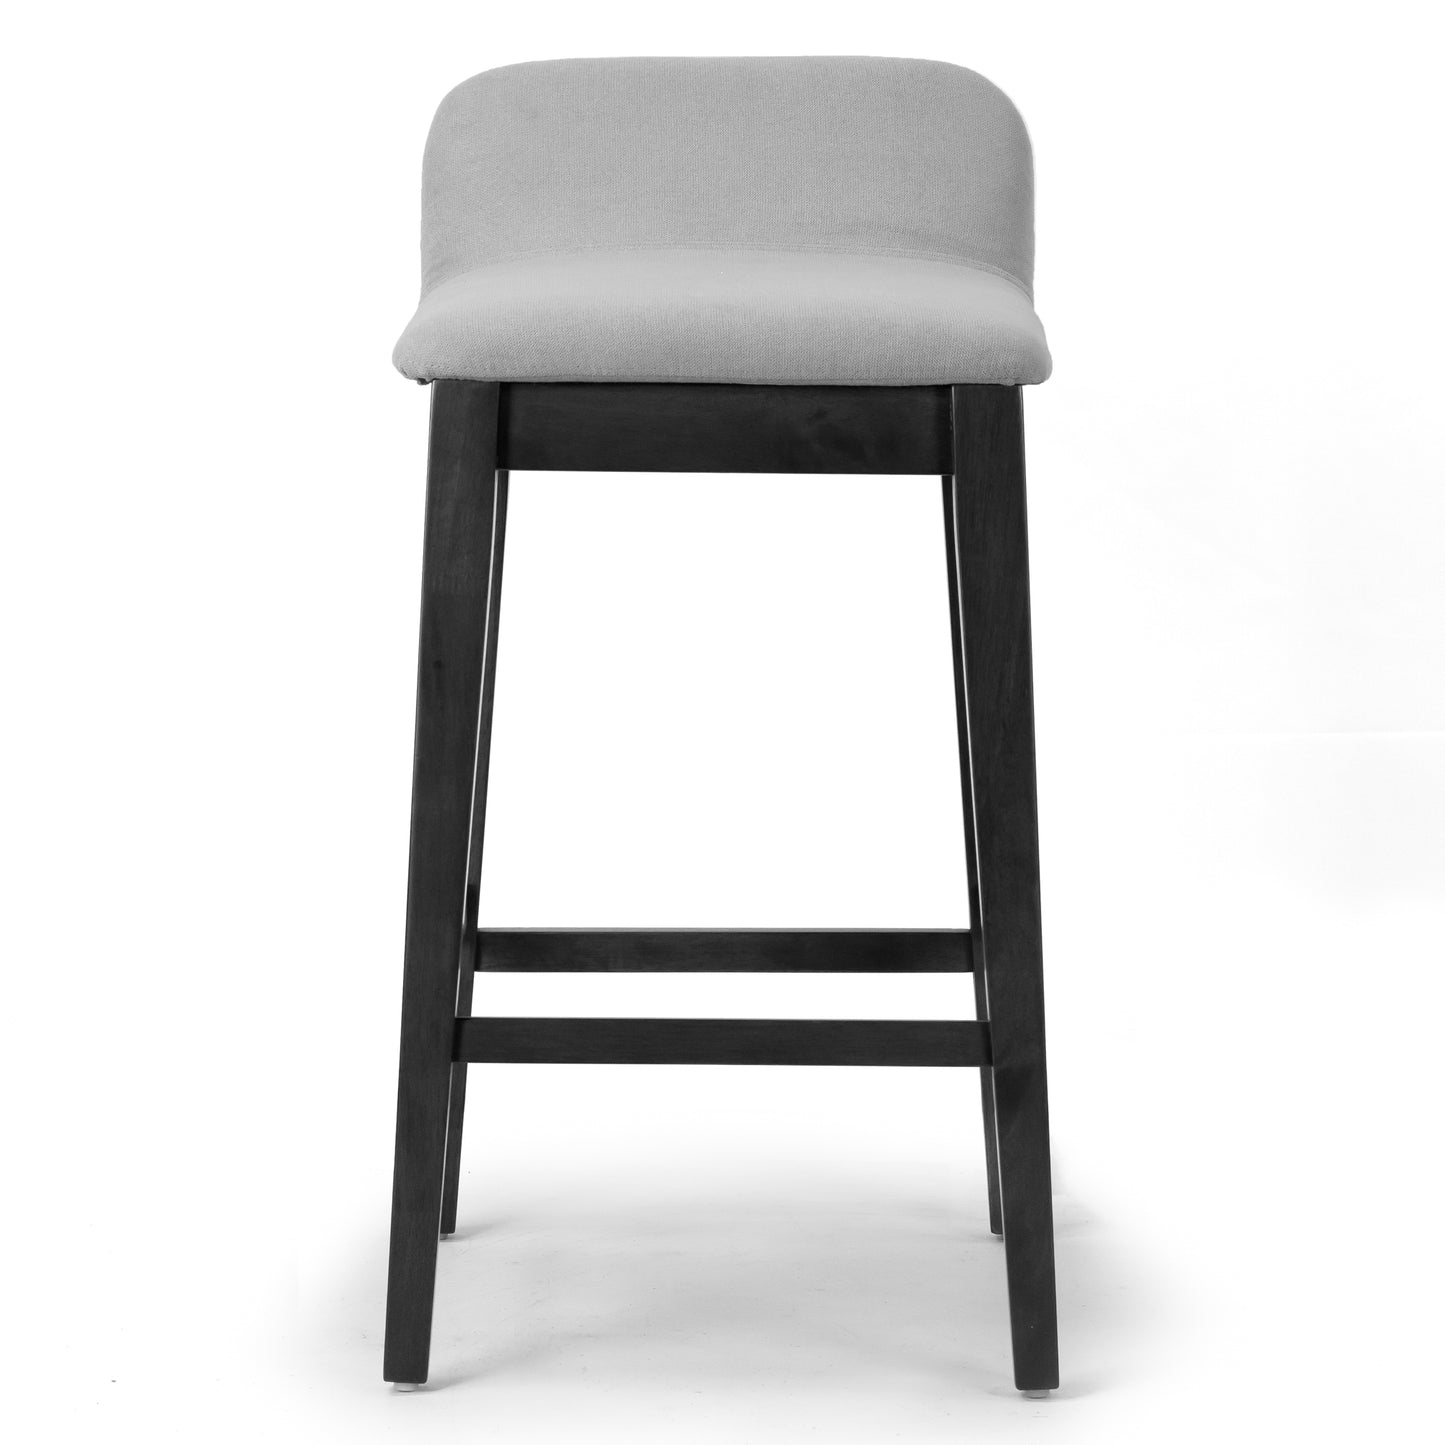 Set of 2 Atia Black Rubberwood Bar Height Barstool with Low Back Fabric Seat